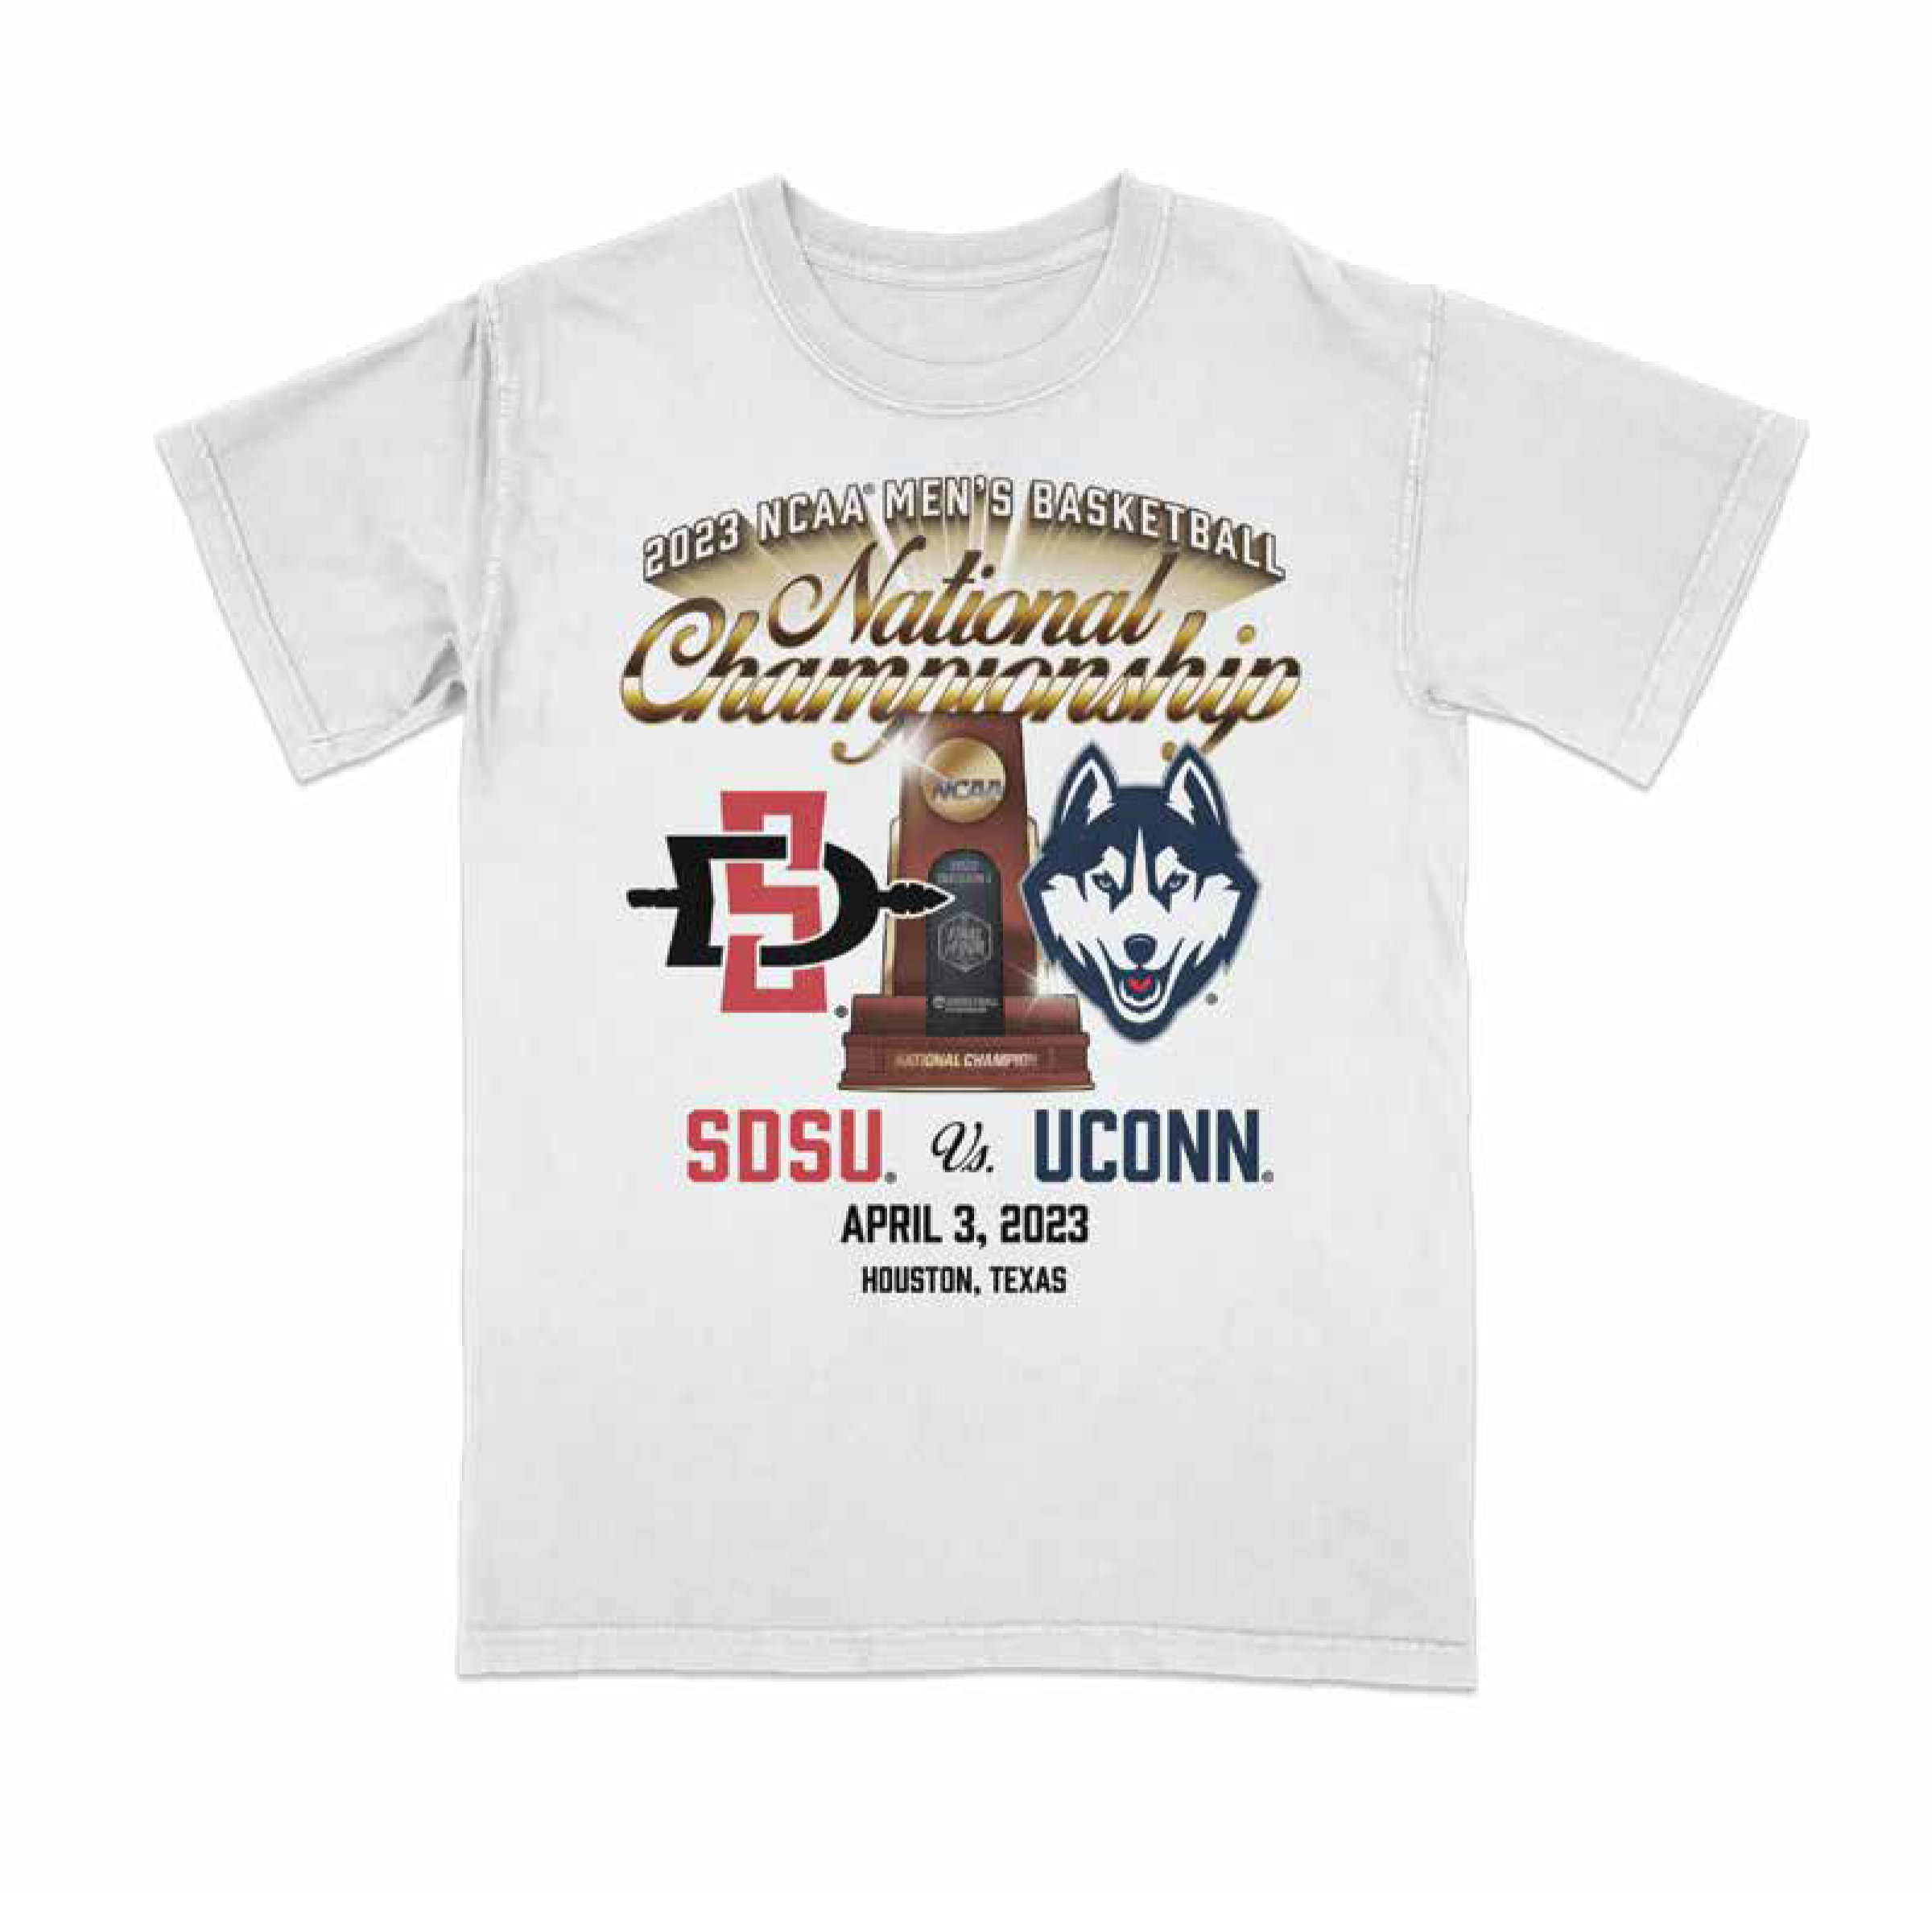 UConn Men's Basketball Final Four Tee 2023 by Retro Brand – The